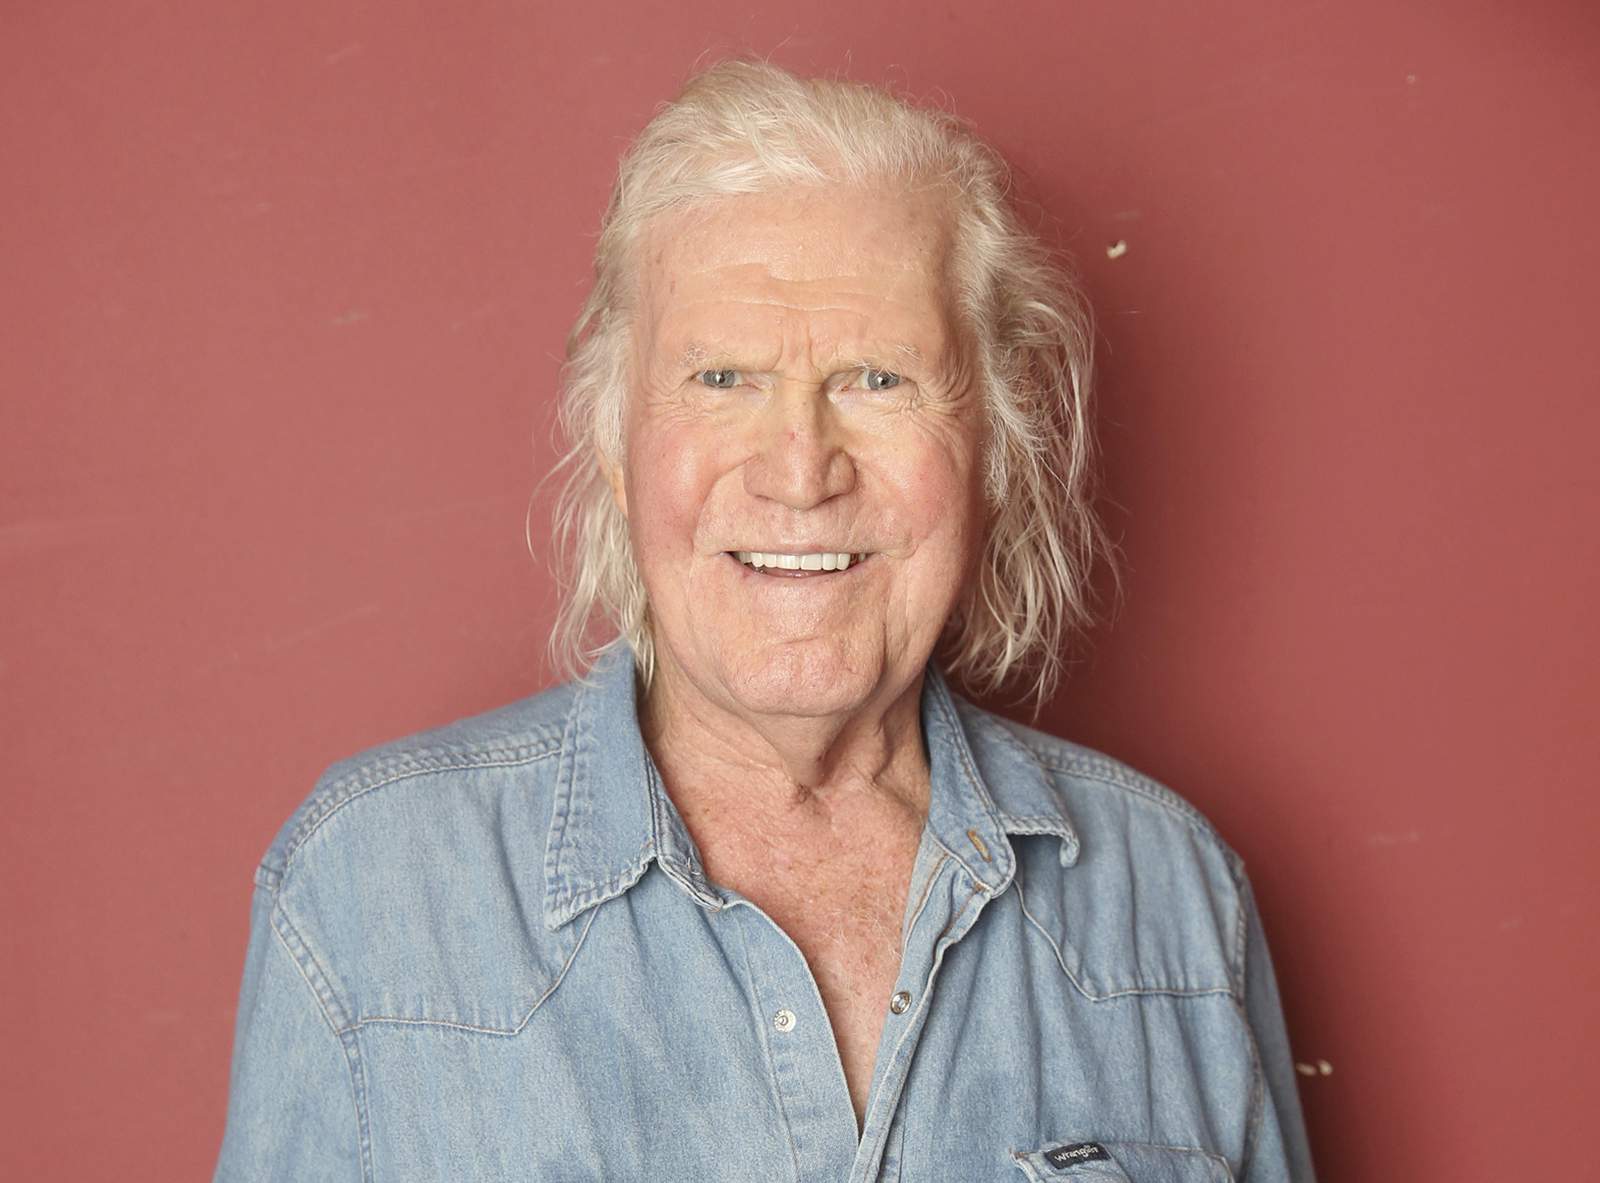 Outlaw country artist Billy Joe Shaver dead at 81